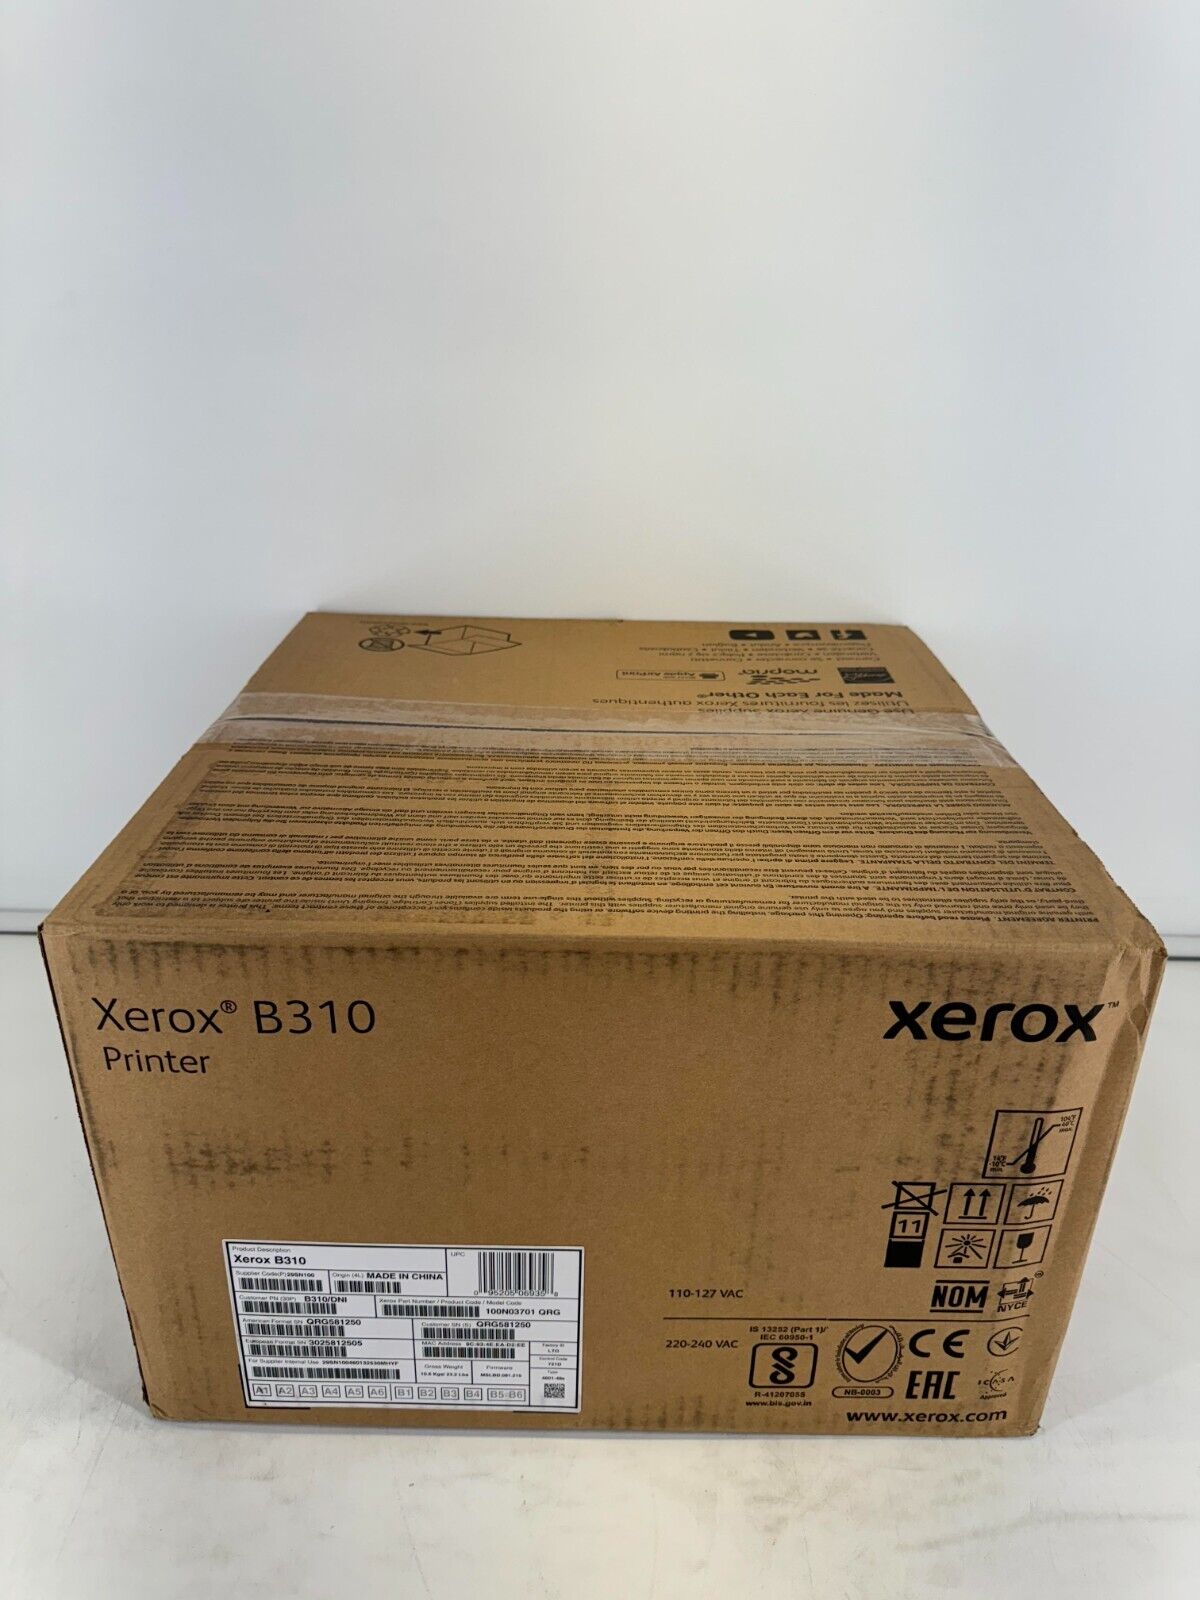 Xerox B310 Black and White Wireless Laser Printer B310/DNI - 0 Printed Pages